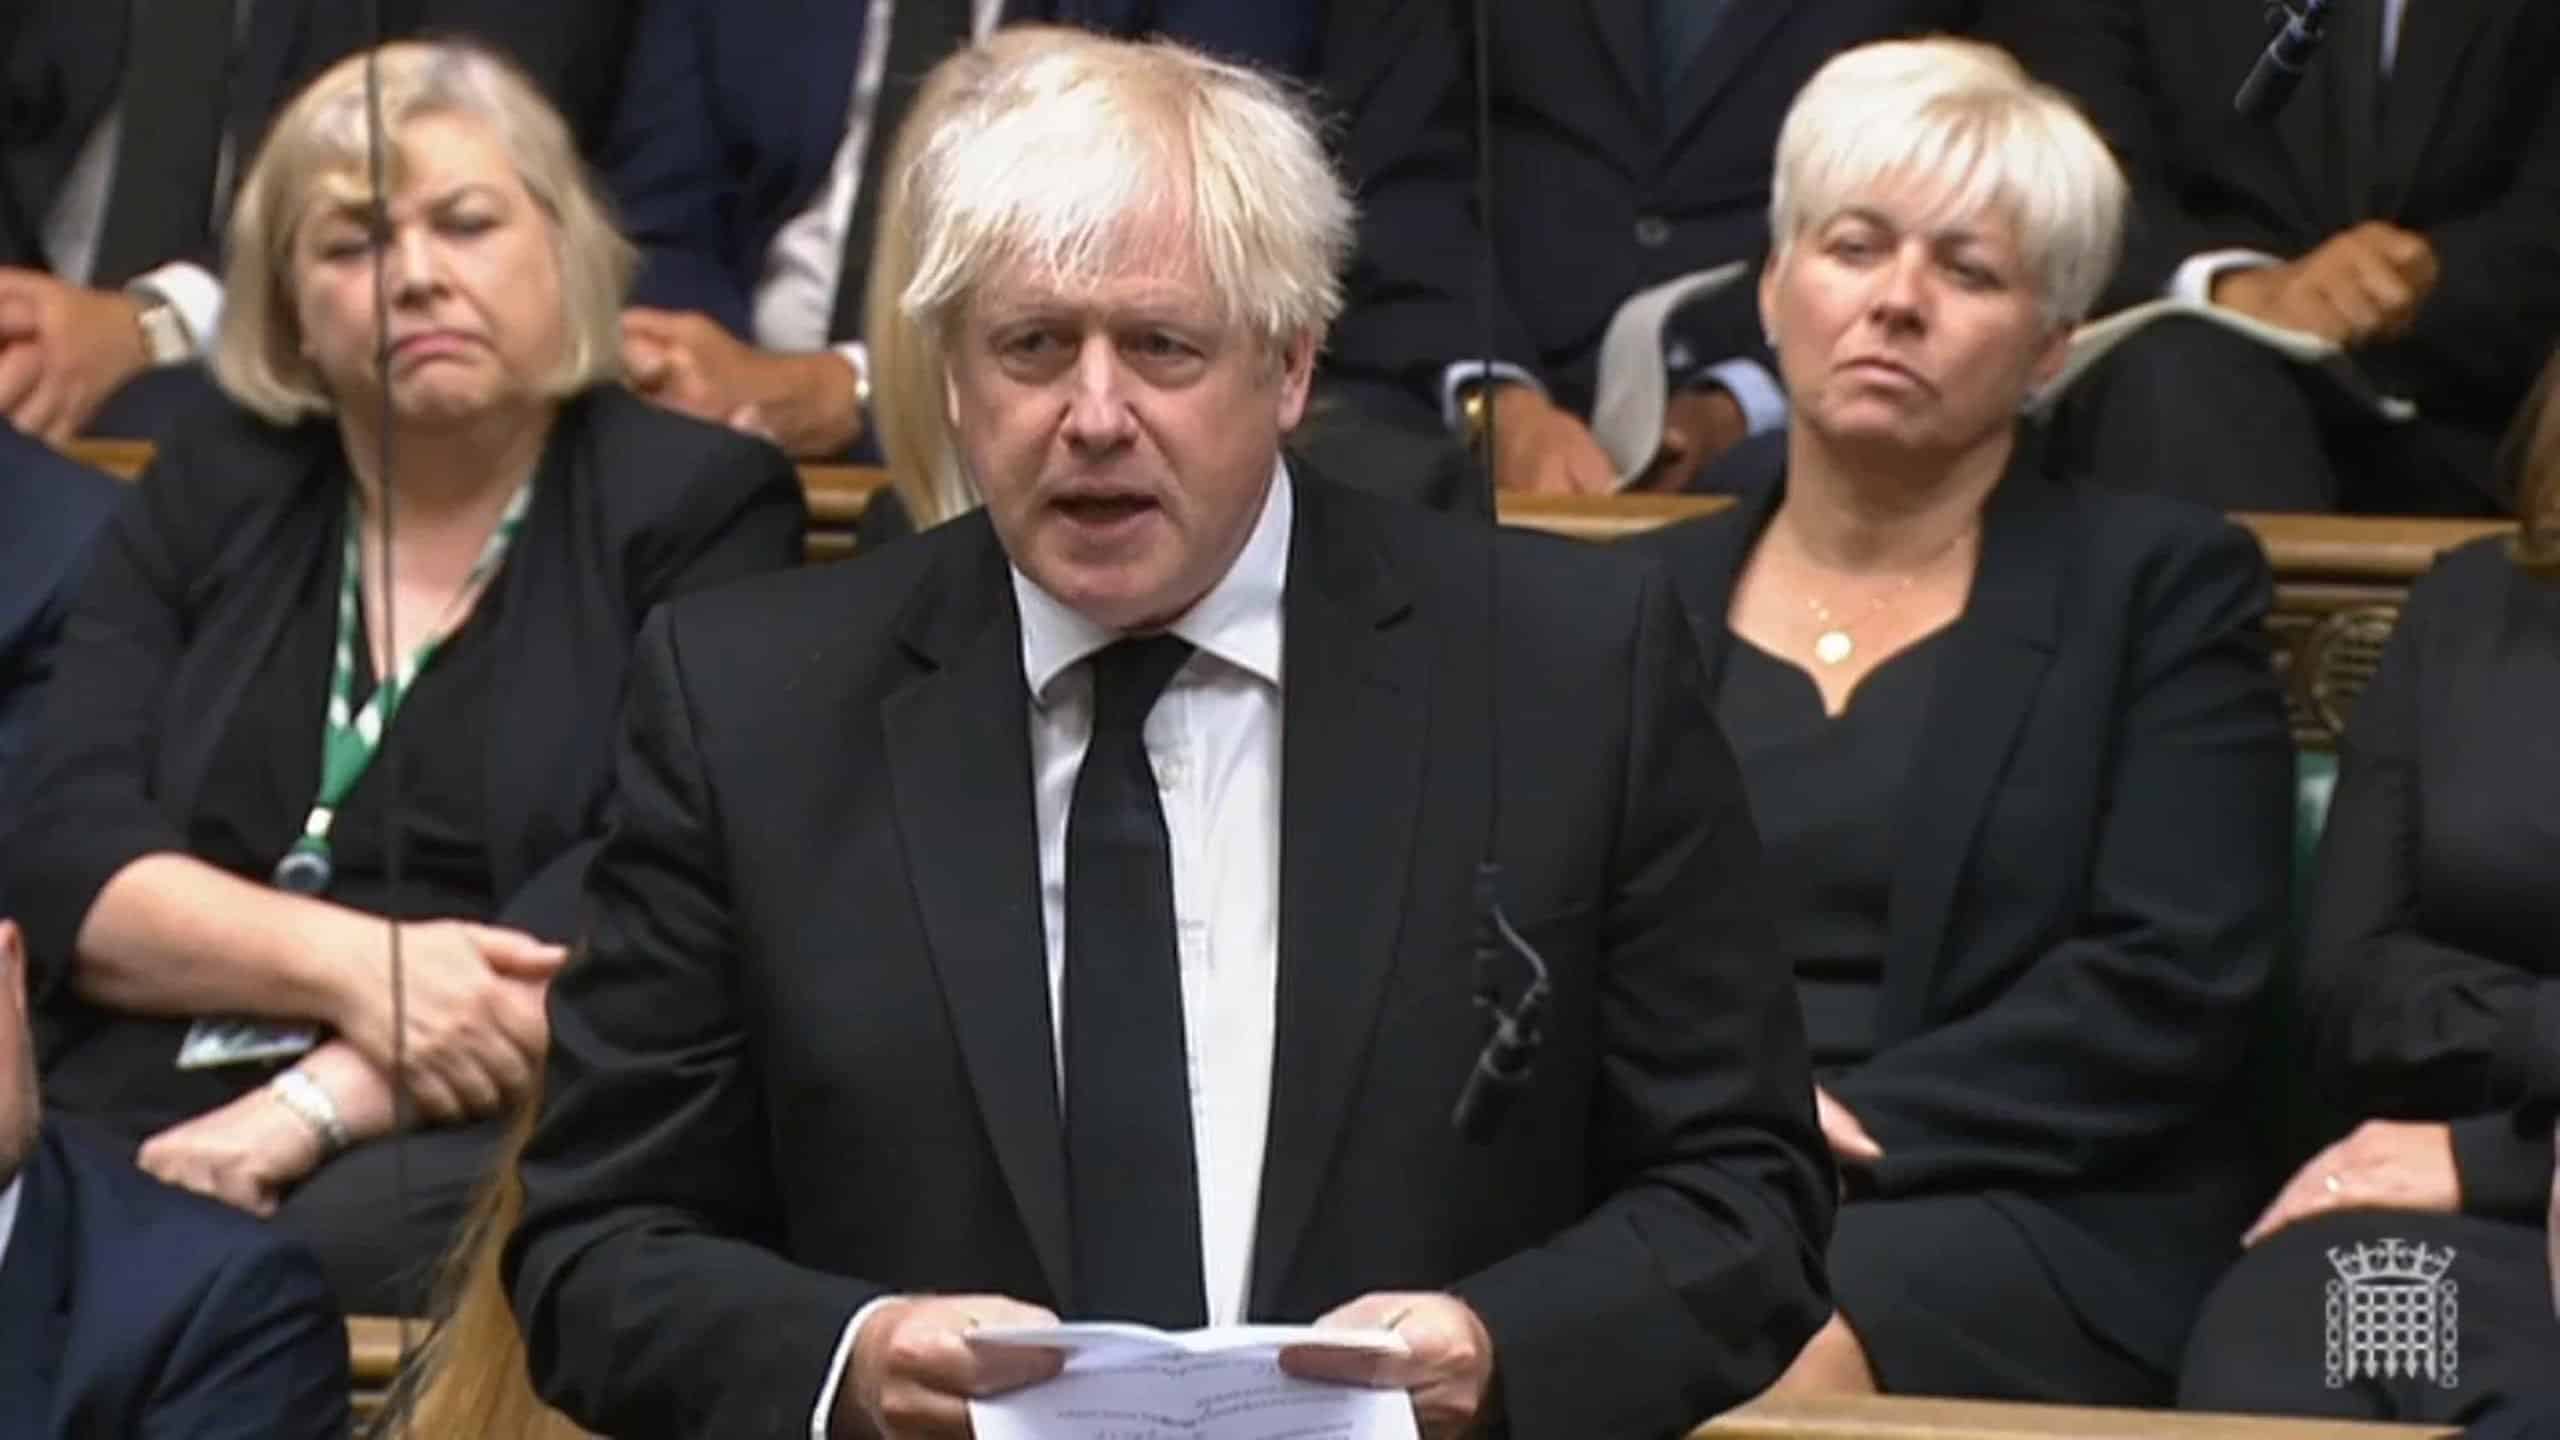 Watch: Boris Johnson pays tribute to ‘Elizabeth the Great’ – not everyone is gushing about it though